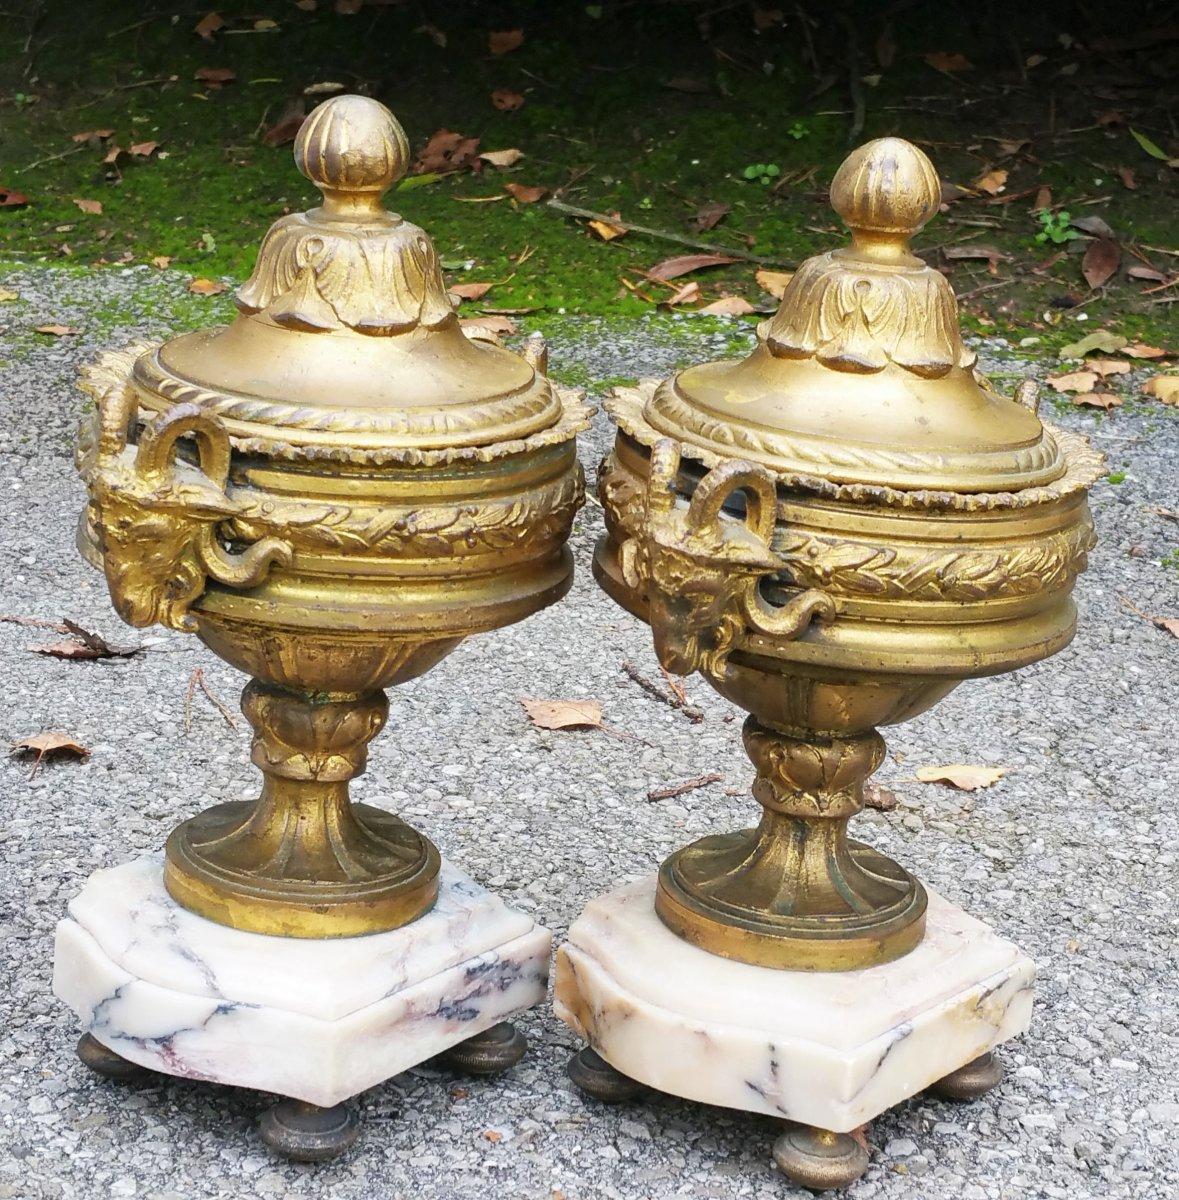 Louis XVI Regule gilded Napoleon III period Cassolettes vases, rams decorations & acanthus leaves, marble base with some chips, open by removing the cover.
France, circa 1860, measures: 26 cm high.